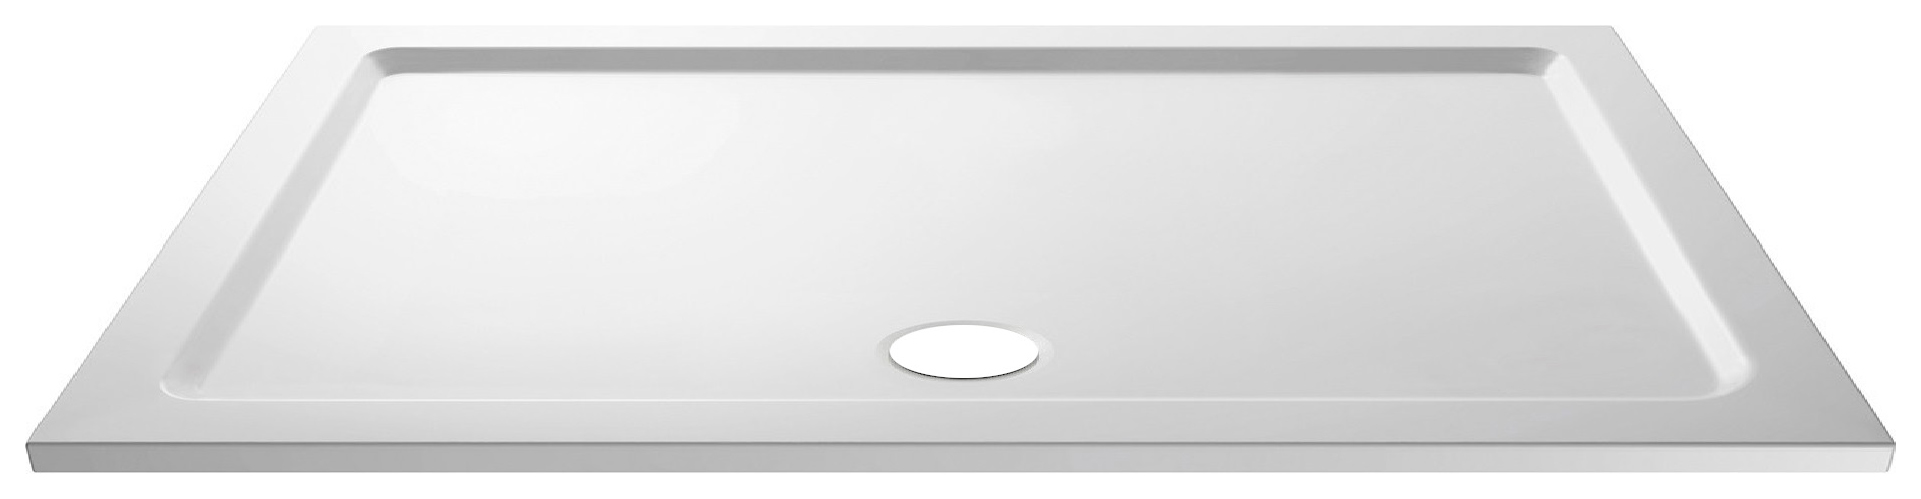 Image of Wickes 40mm Pearlstone Rectangular Shower Tray - 1400 x 800mm